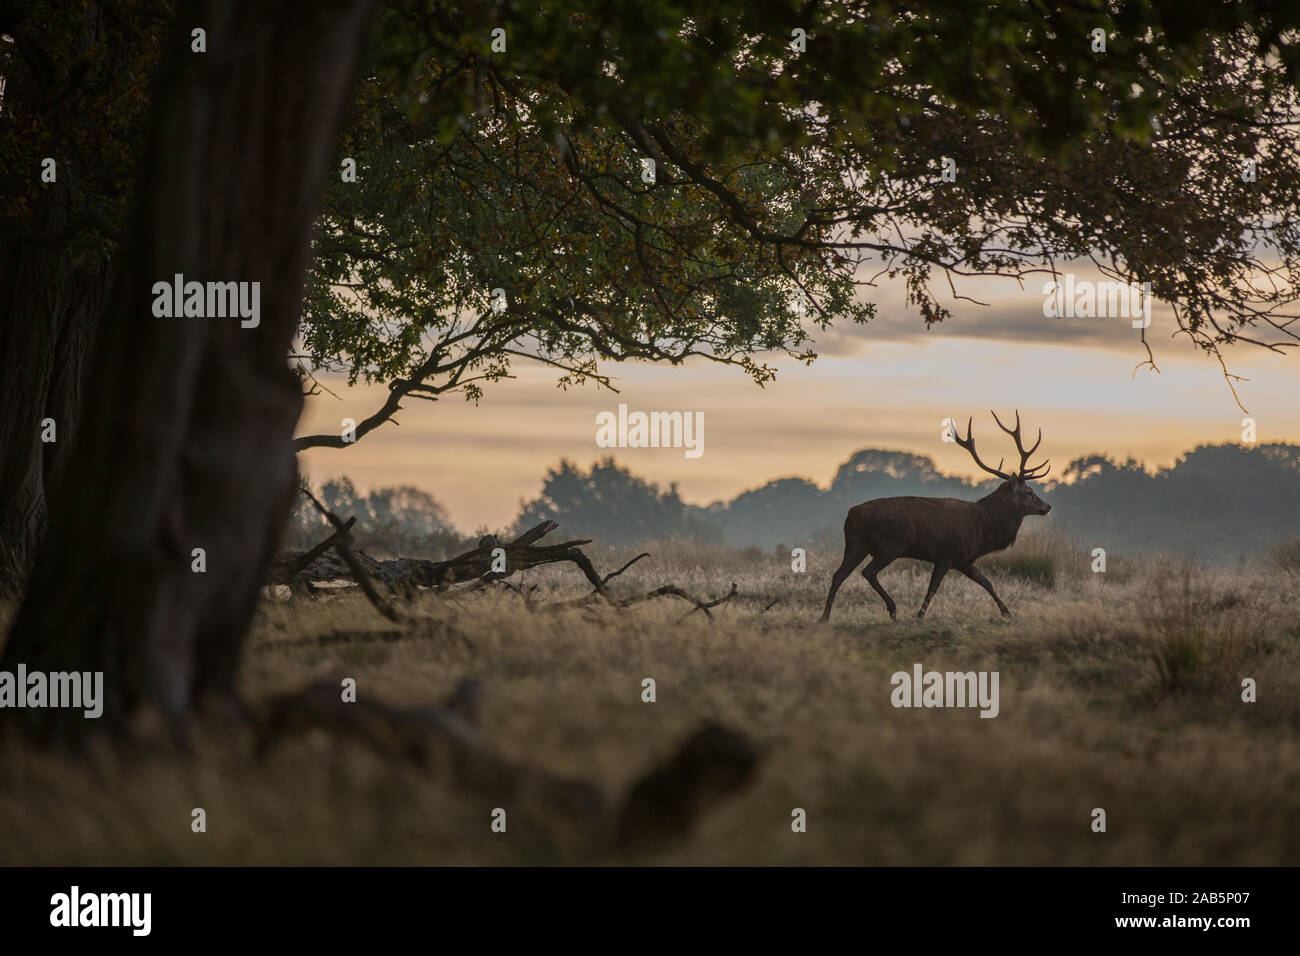 Stag wonders past in the morning, surrounded by trees Stock Photo